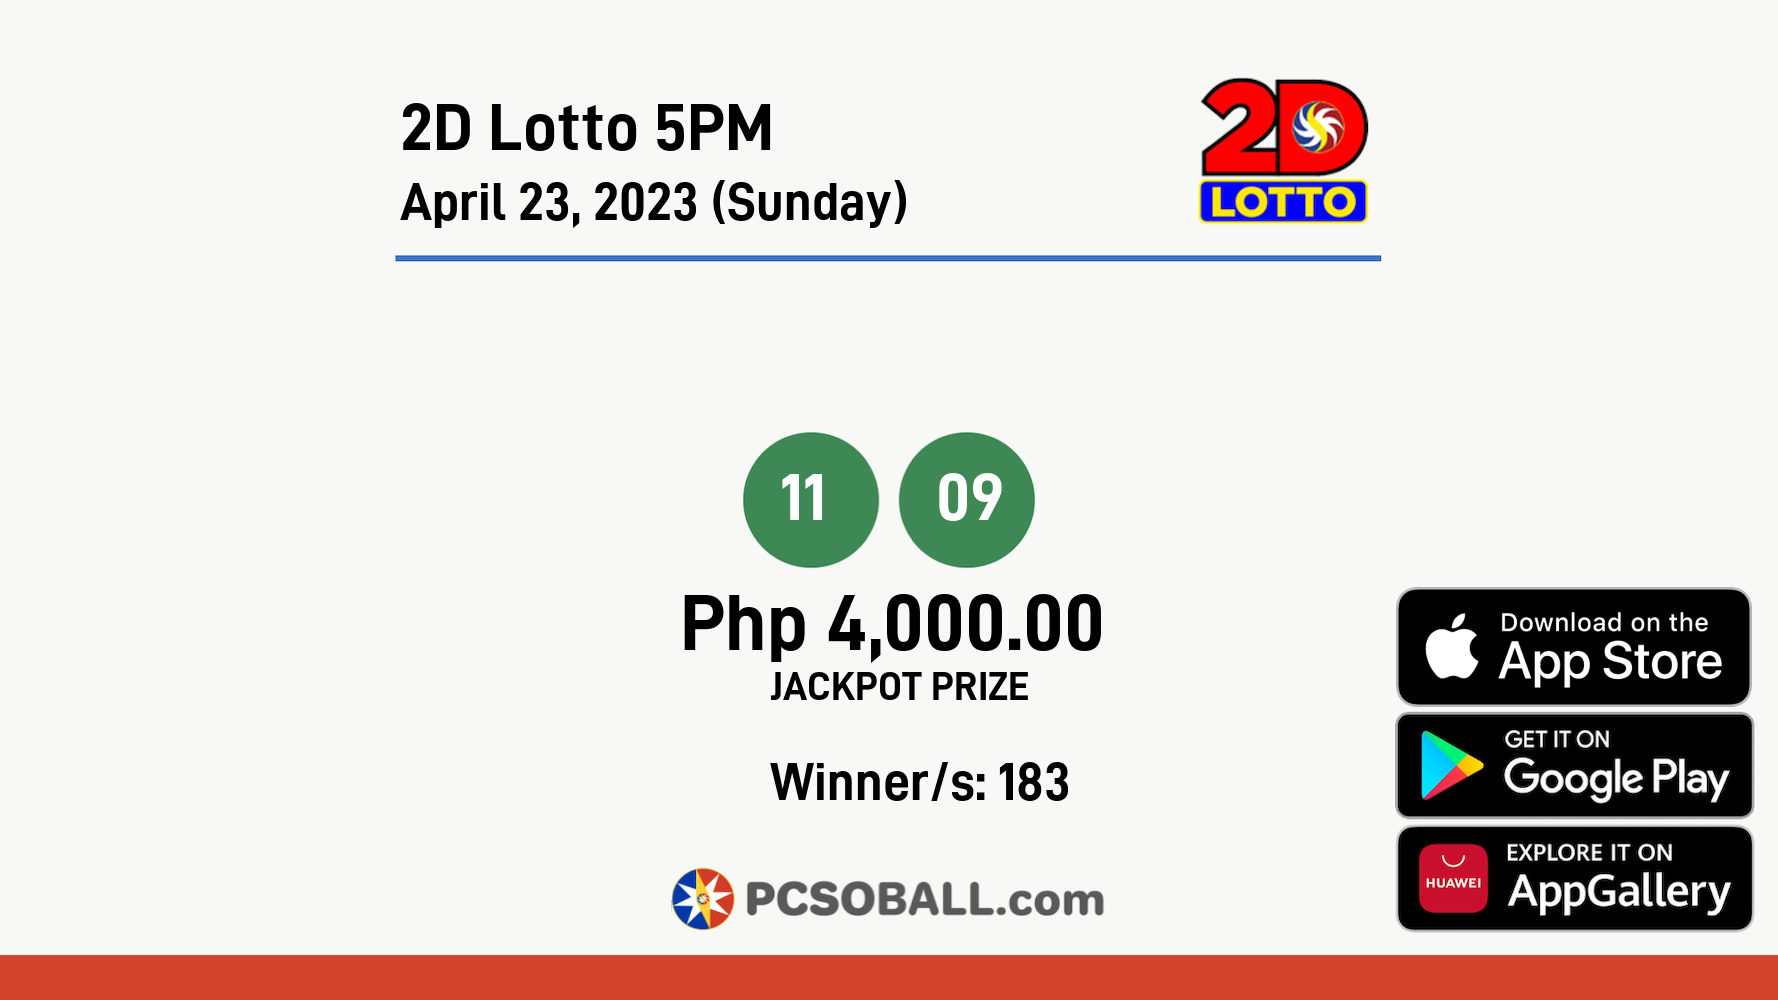 2D Lotto 5PM April 23, 2023 (Sunday) Result